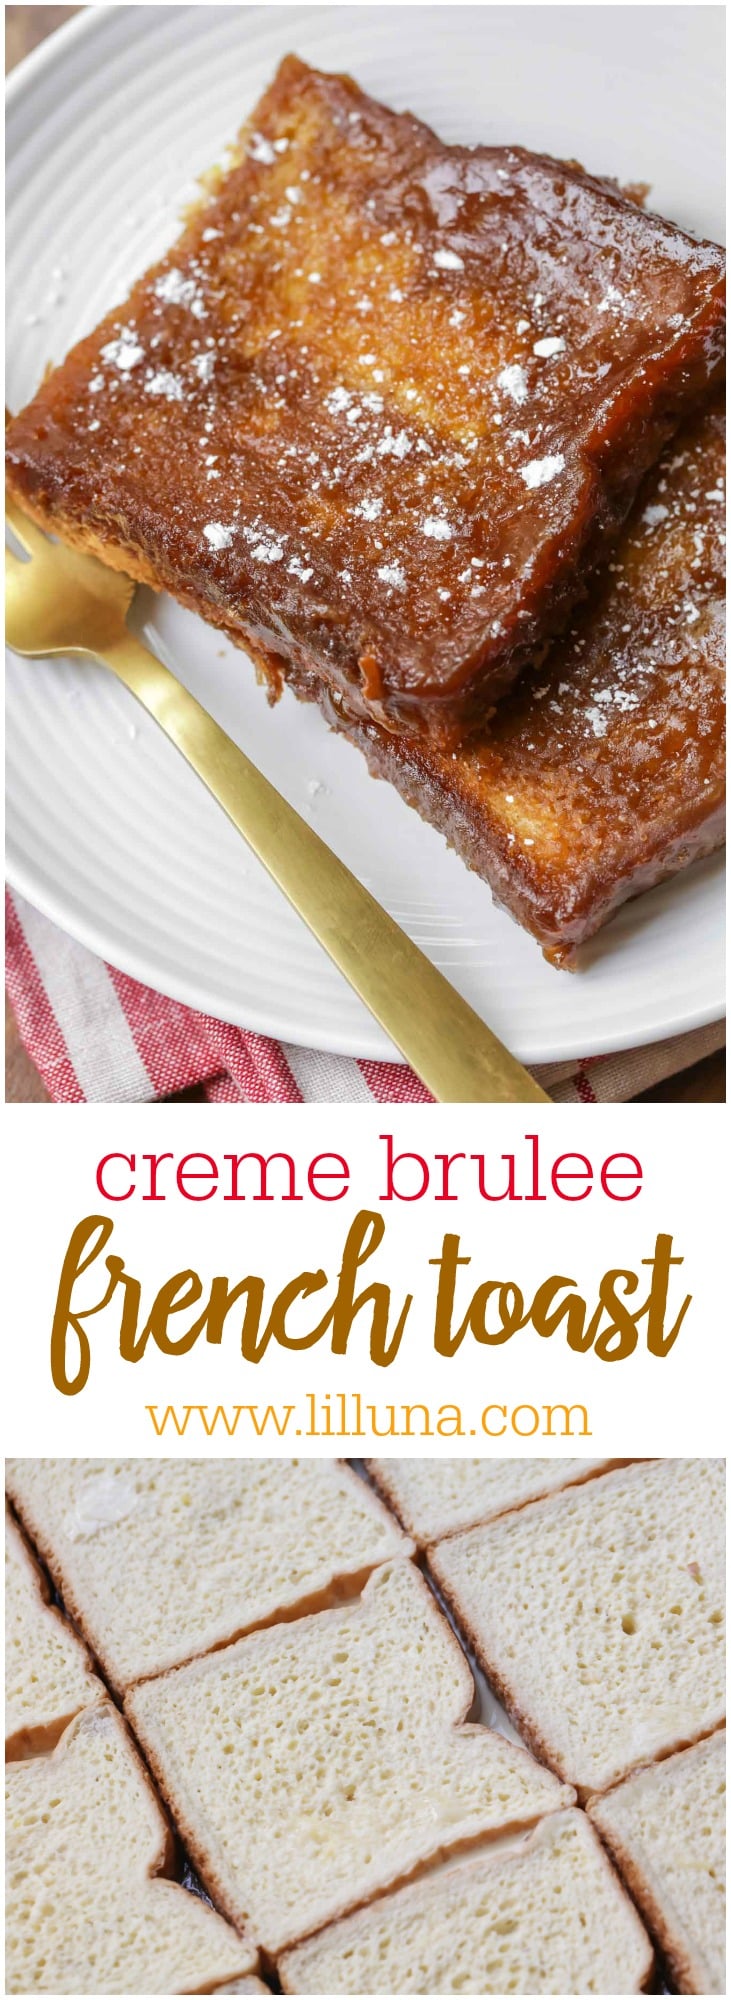 Creme Brulee French Toast - delicious overnight French Toast recipe that has a tasty caramel coating on one side!